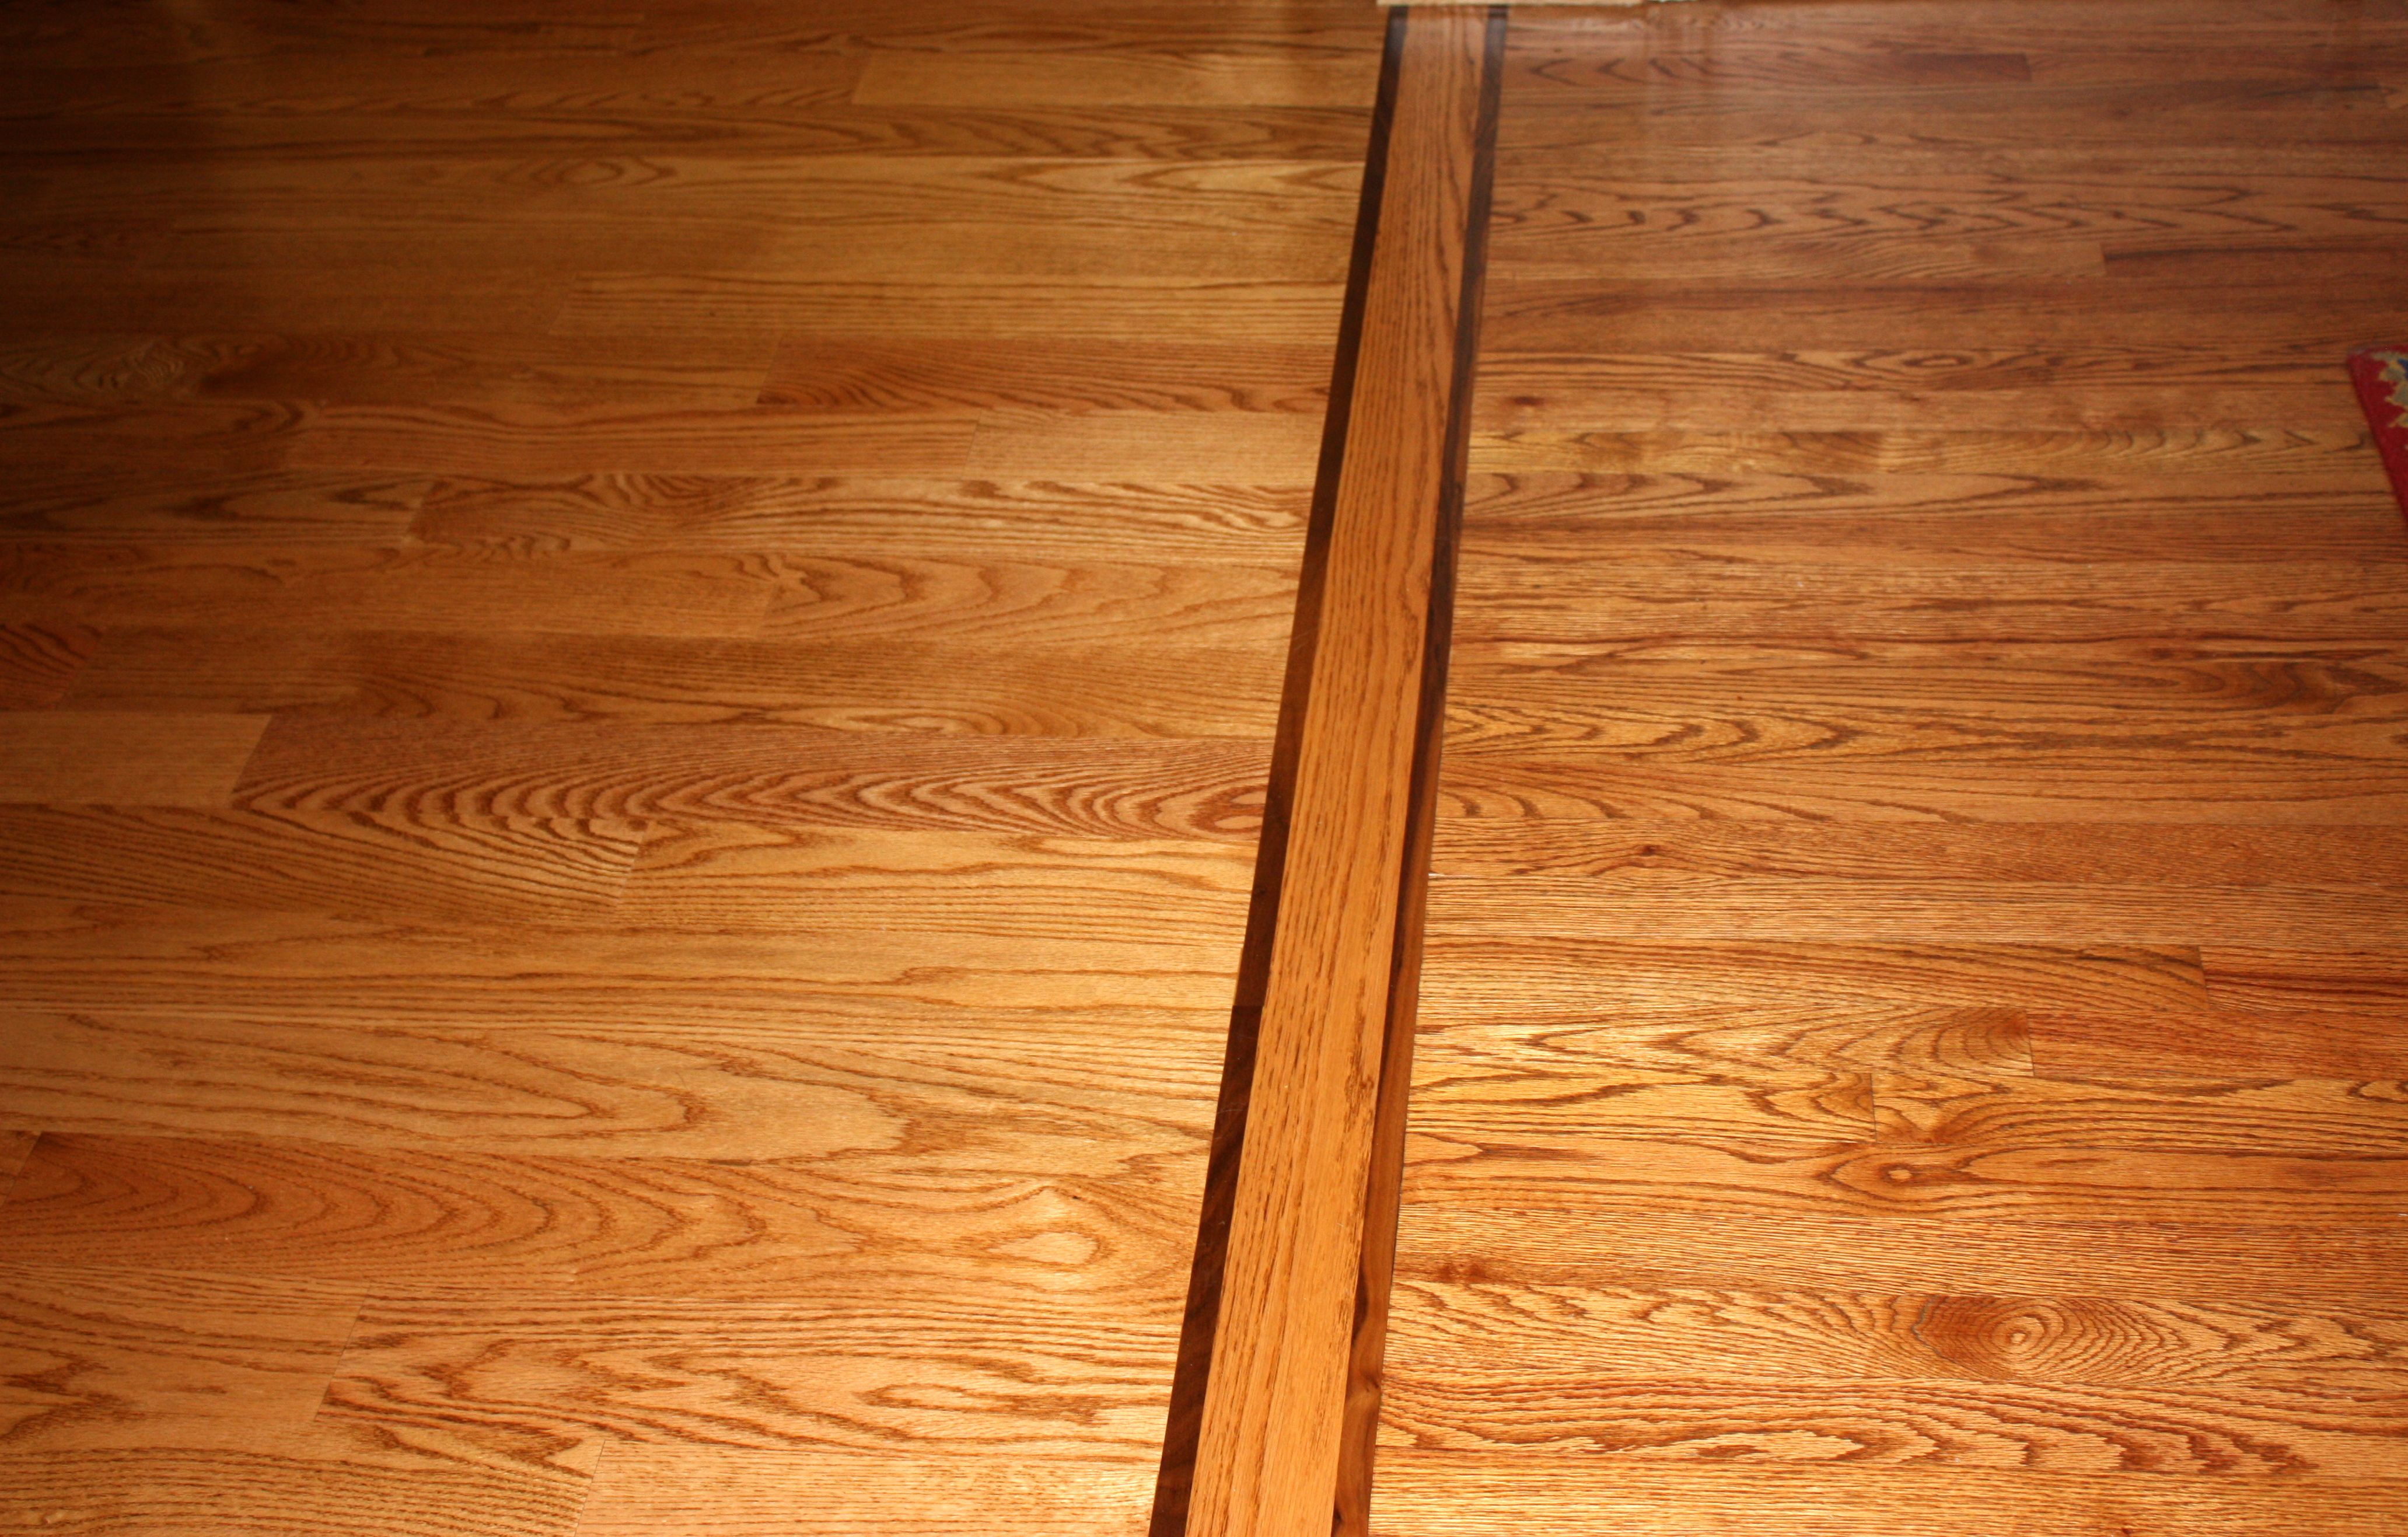 Matching An Existing Hardwood Floor, How To Find Matching Laminate Flooring